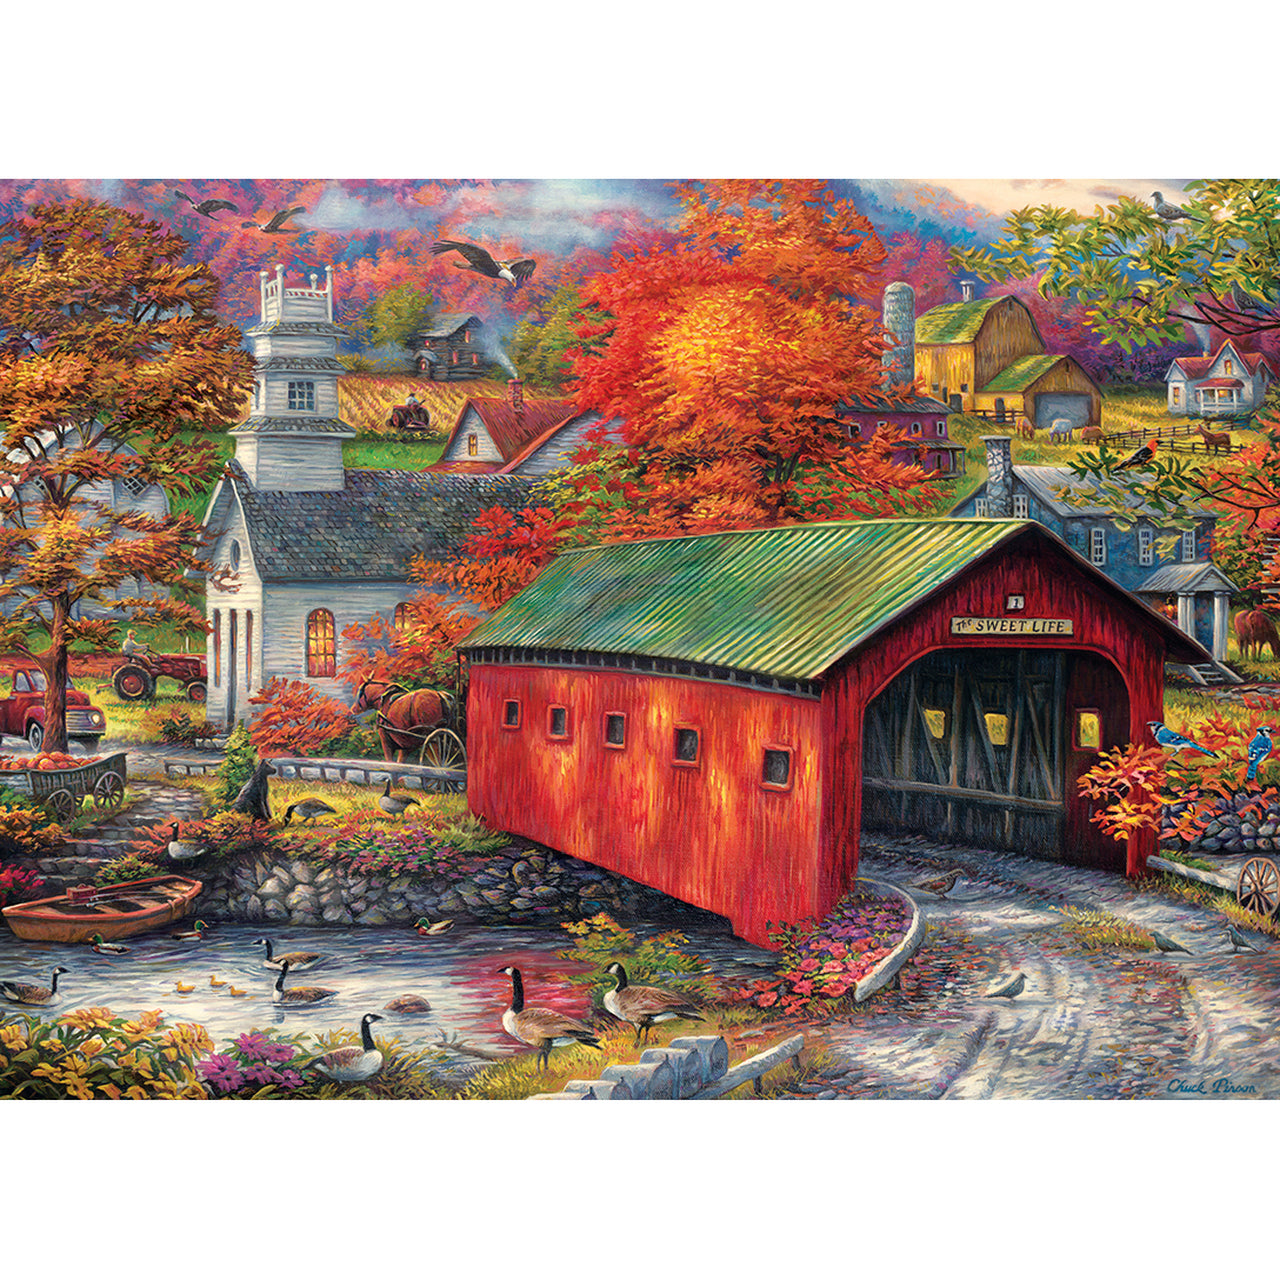 Chuck Pinson Gallery - The Sweet Life 1000 Piece Jigsaw Puzzle by Masterpieces